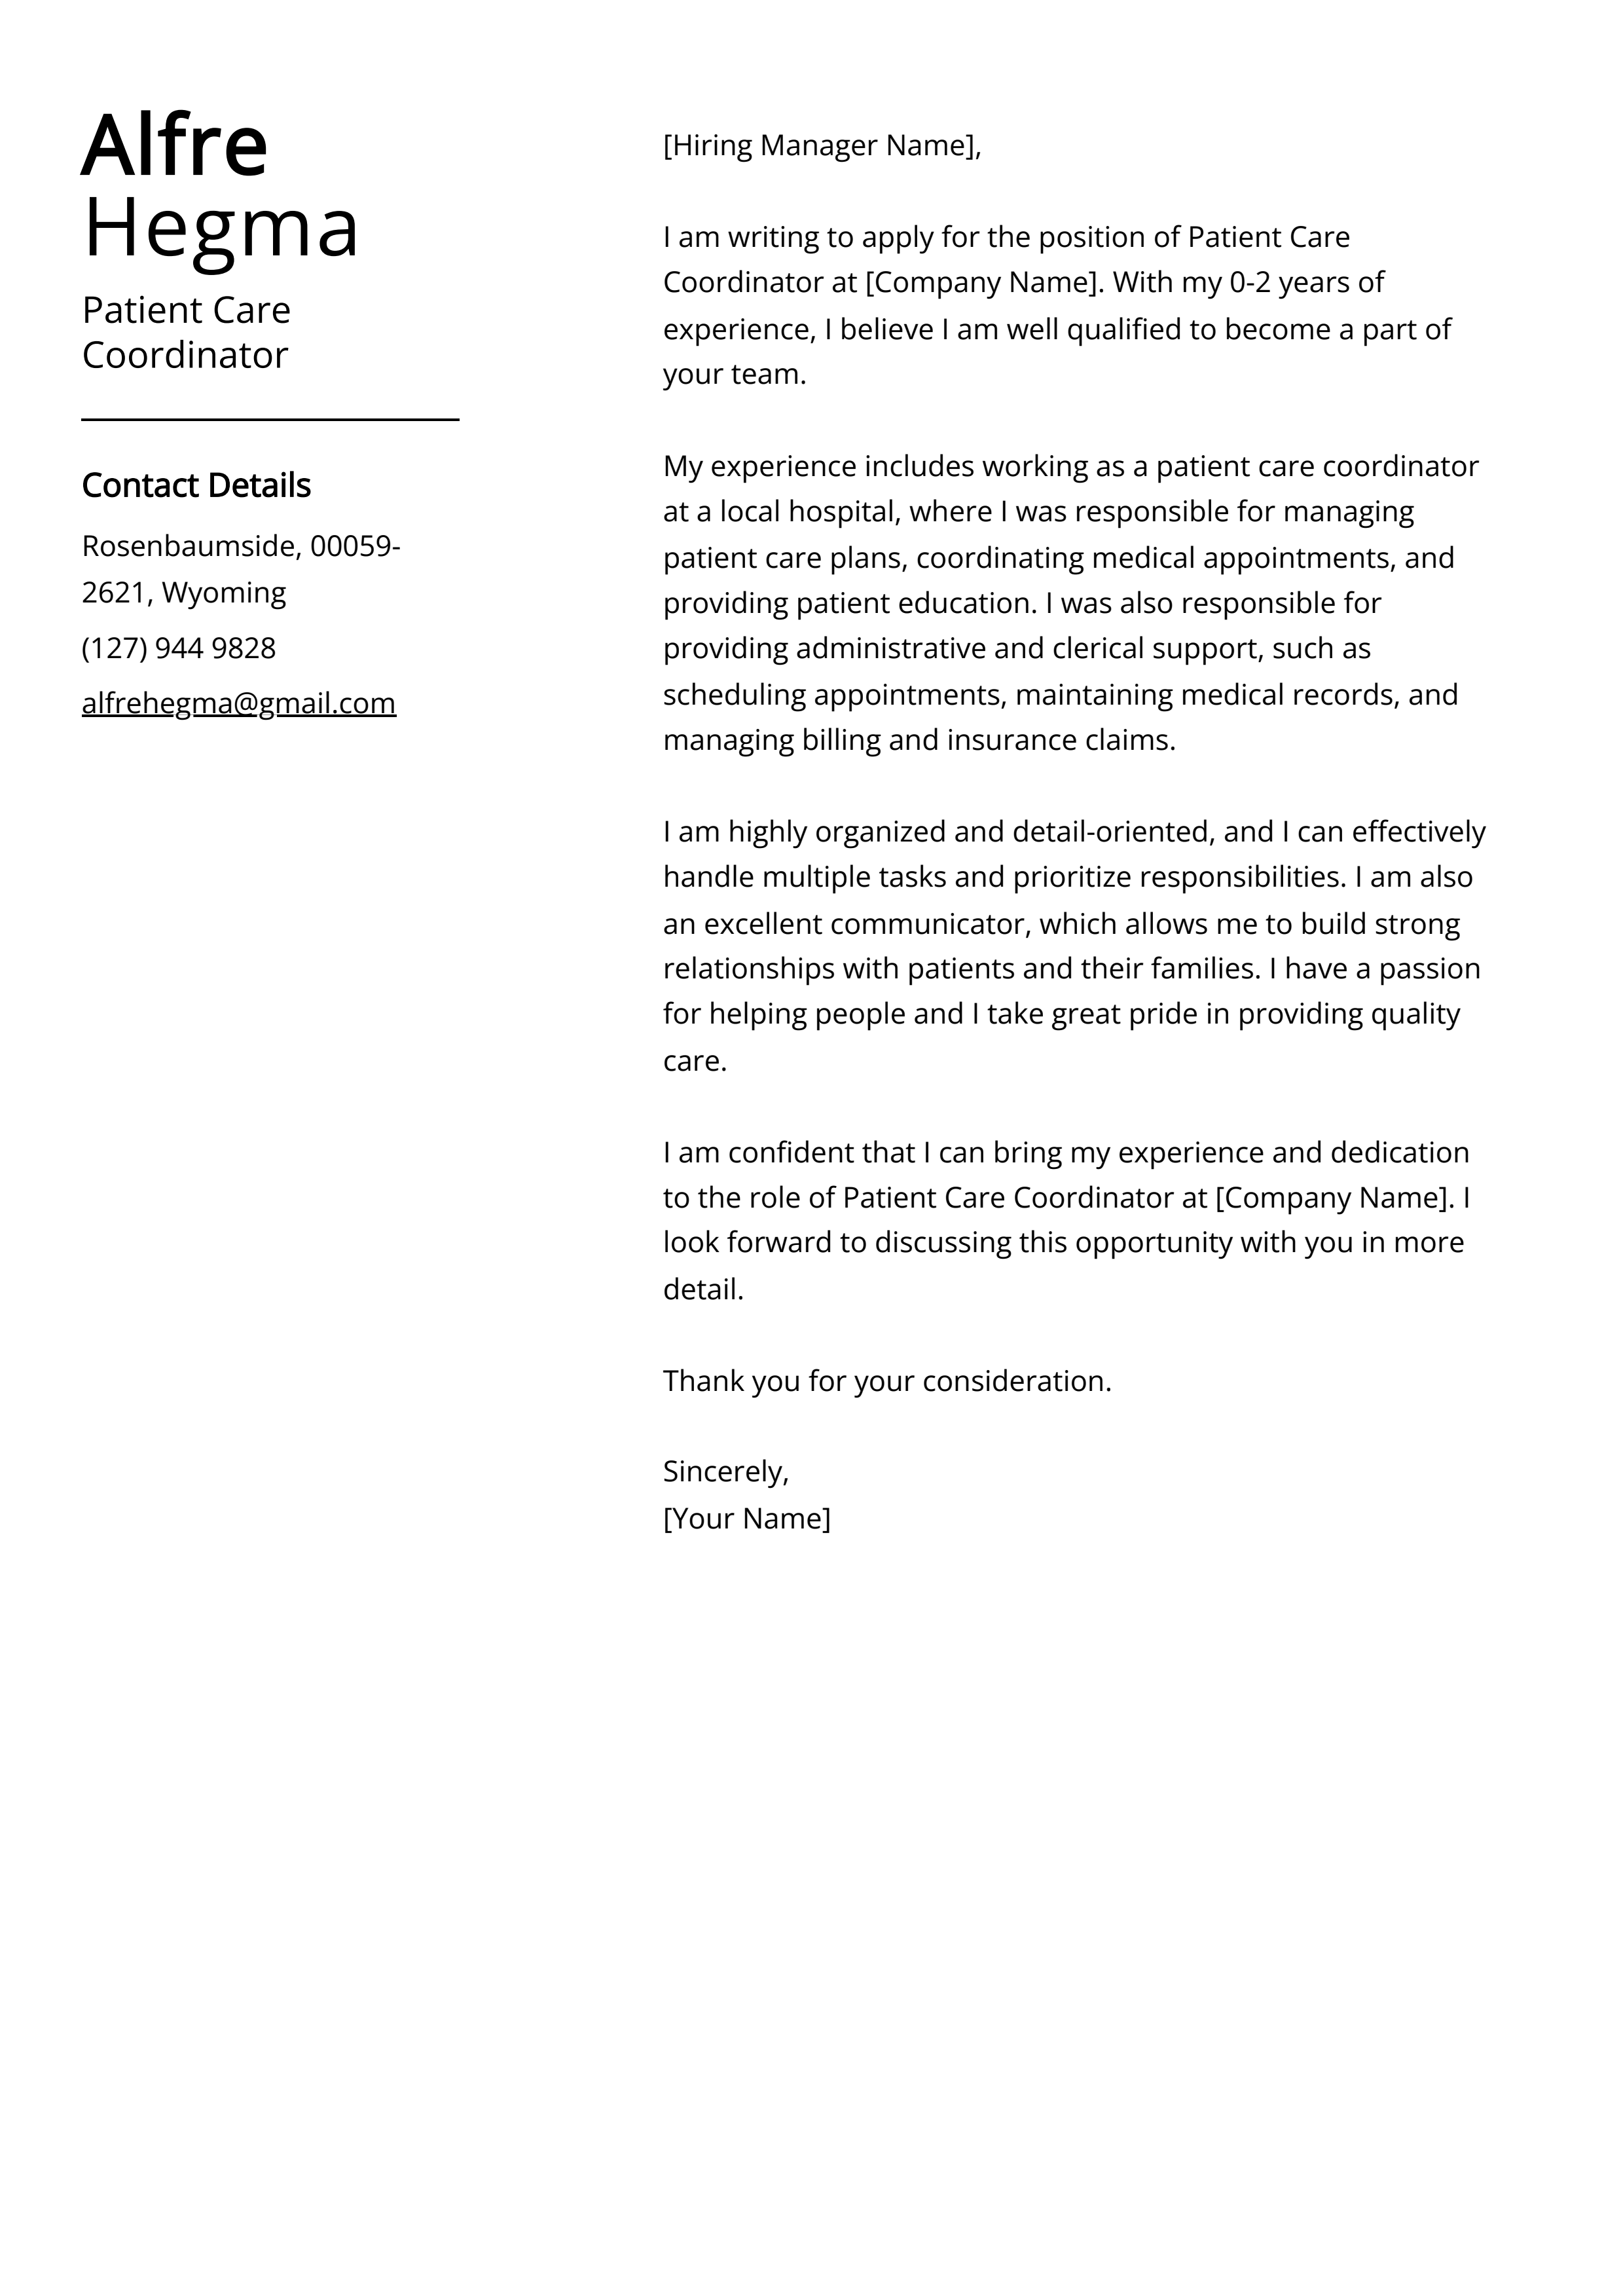 Patient Care Coordinator Cover Letter Example